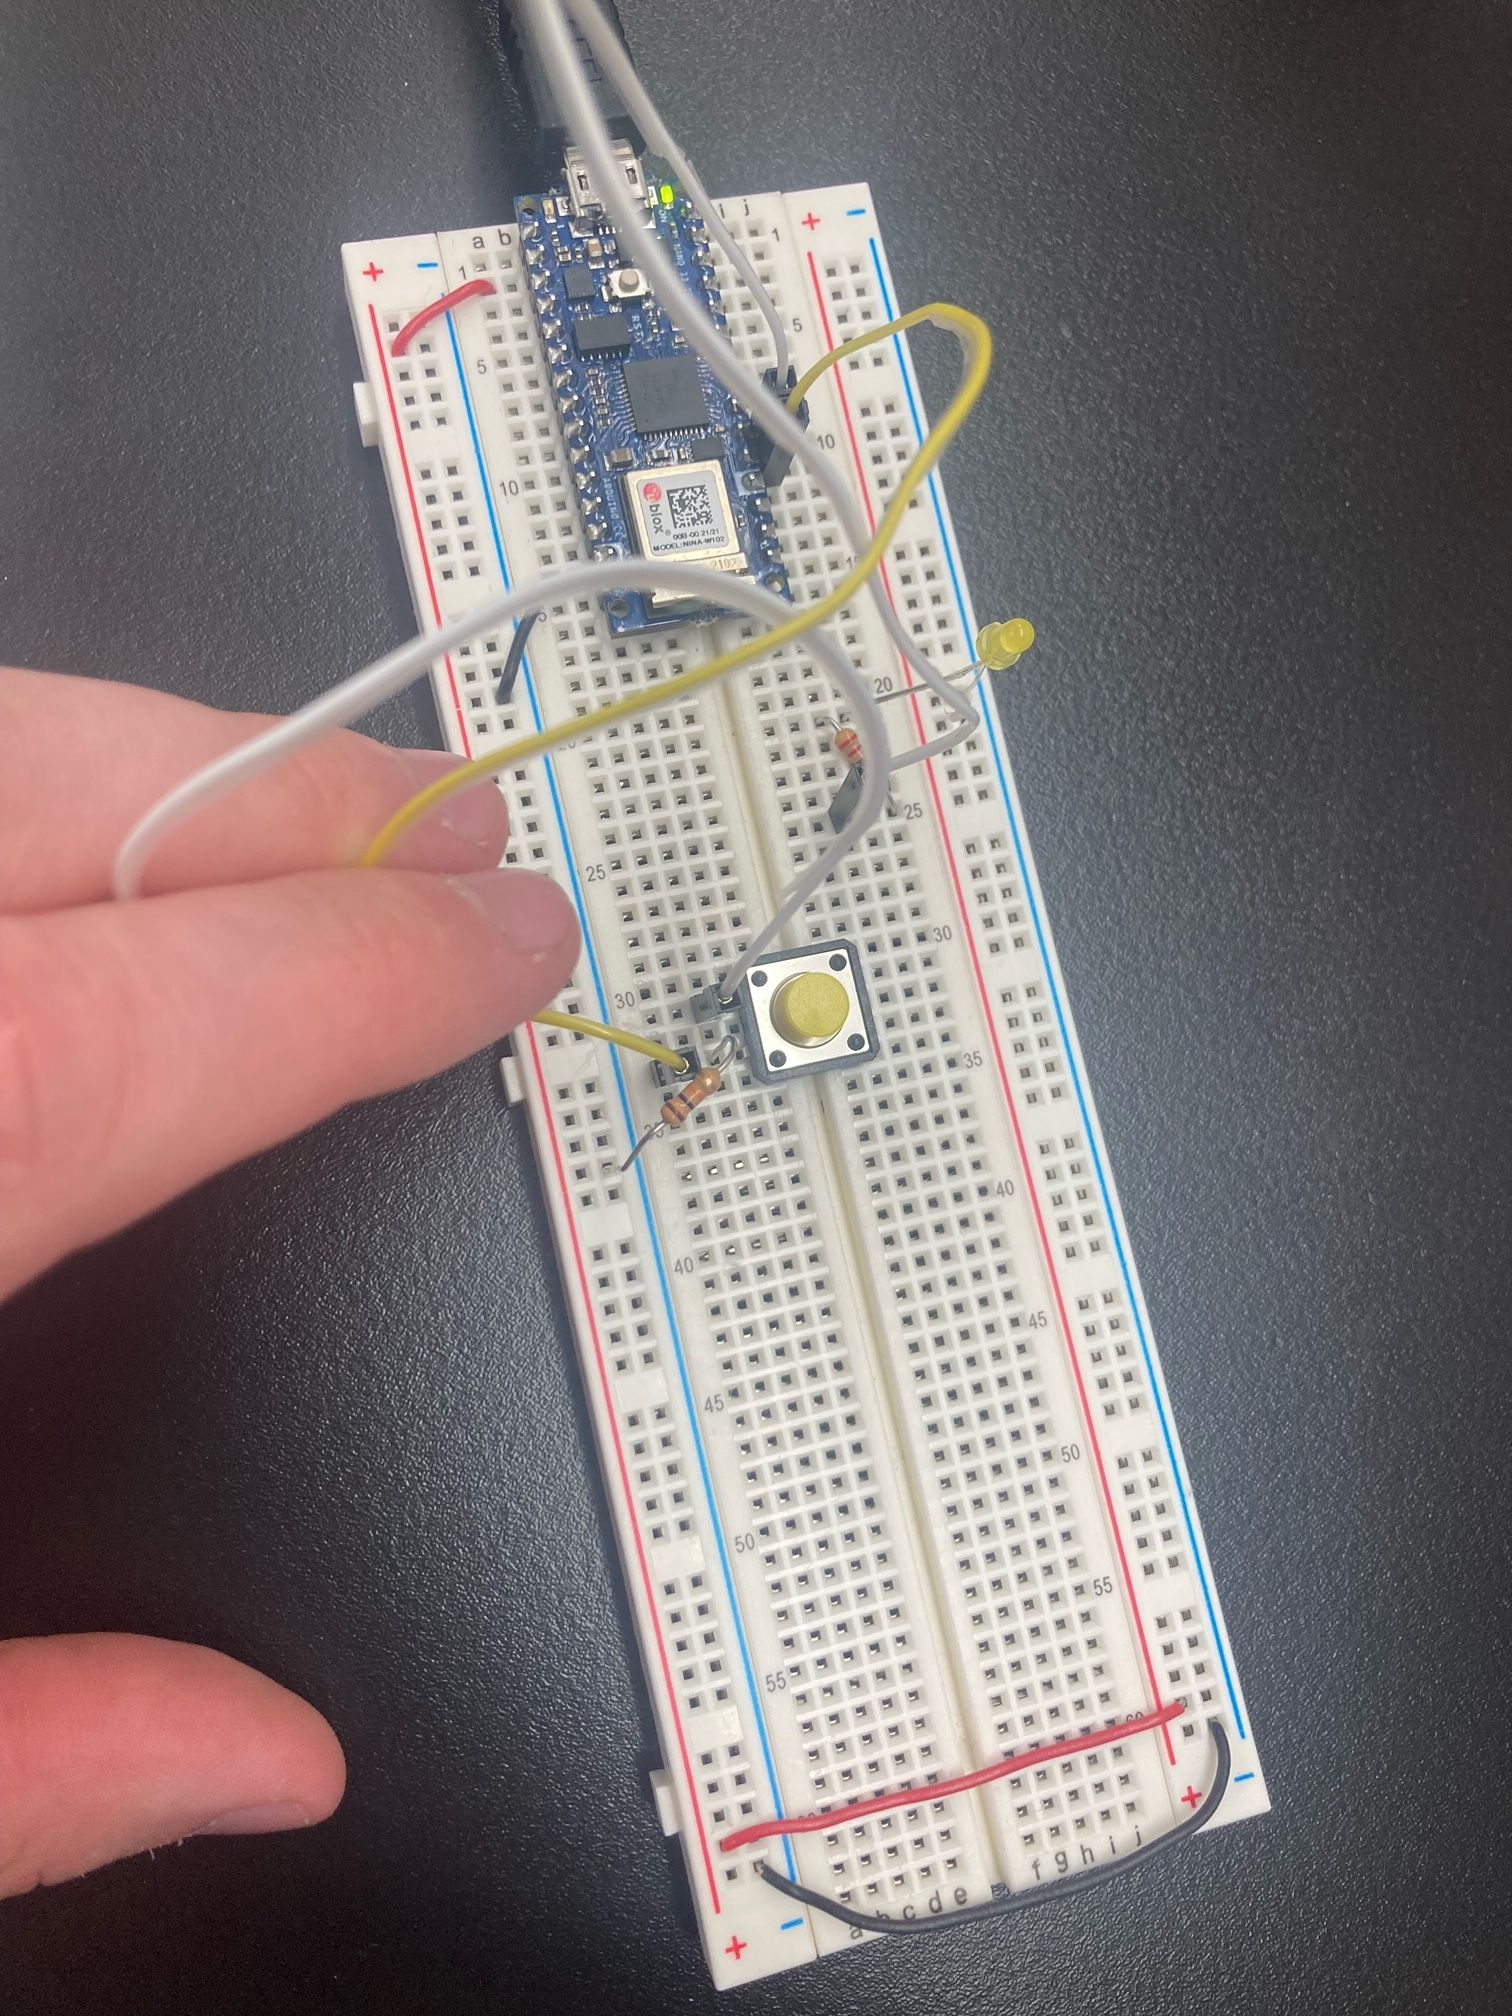 A breadboard with a pushbutton wired to an Arduino Nano as a digital input and output to LED.